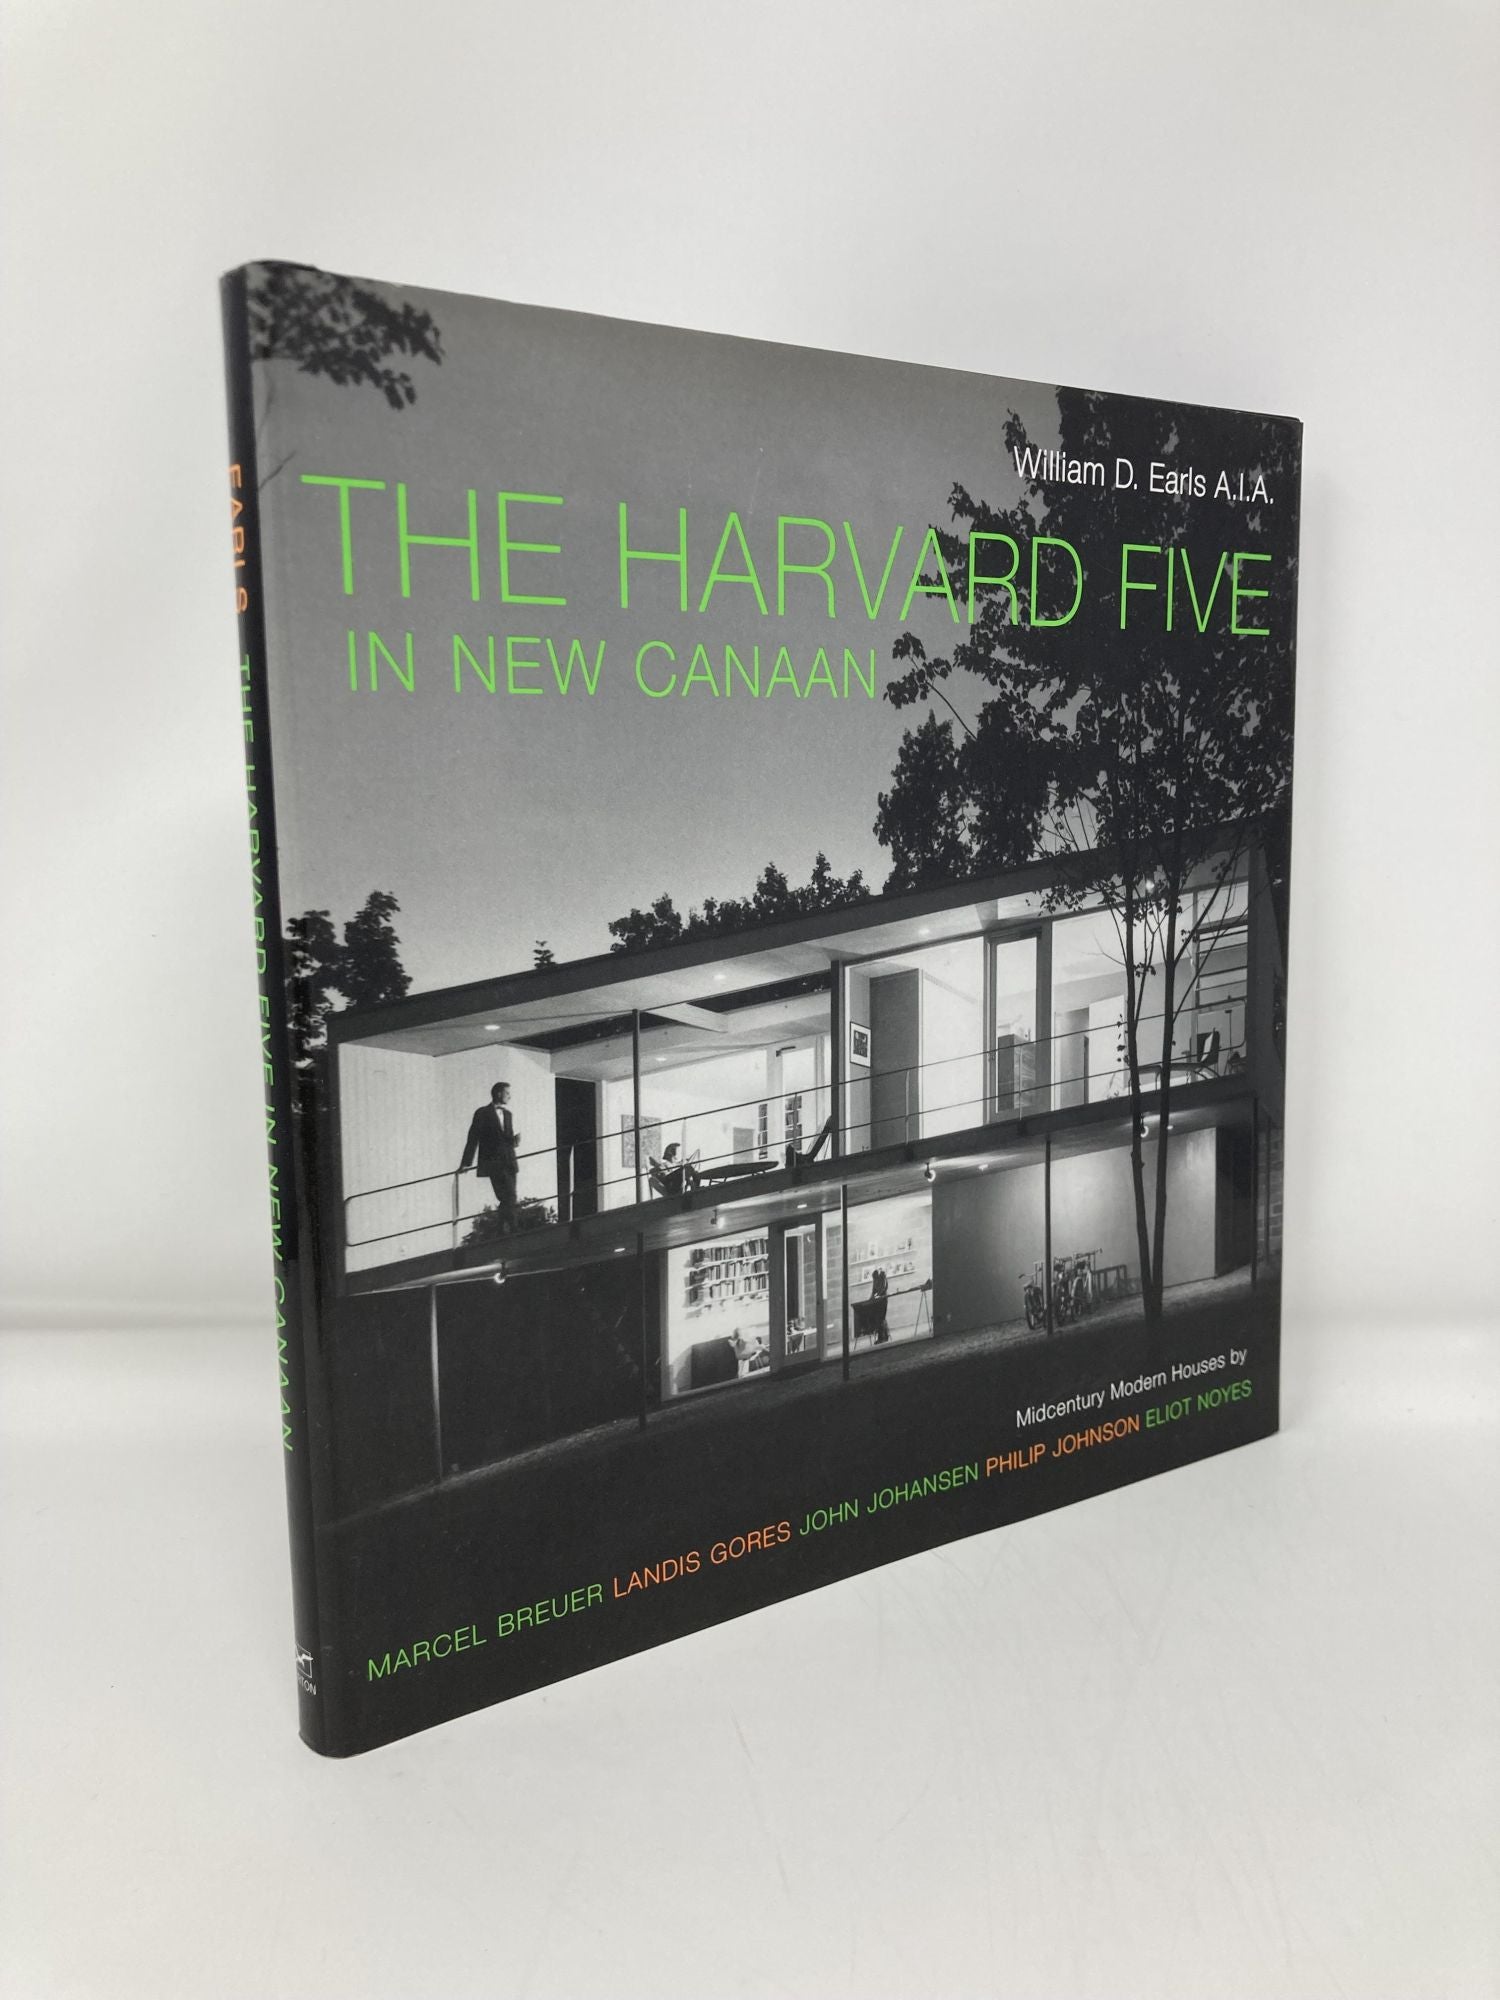 The Harvard Five in New Canaan: Midcentury Modern Houses by Marcel 